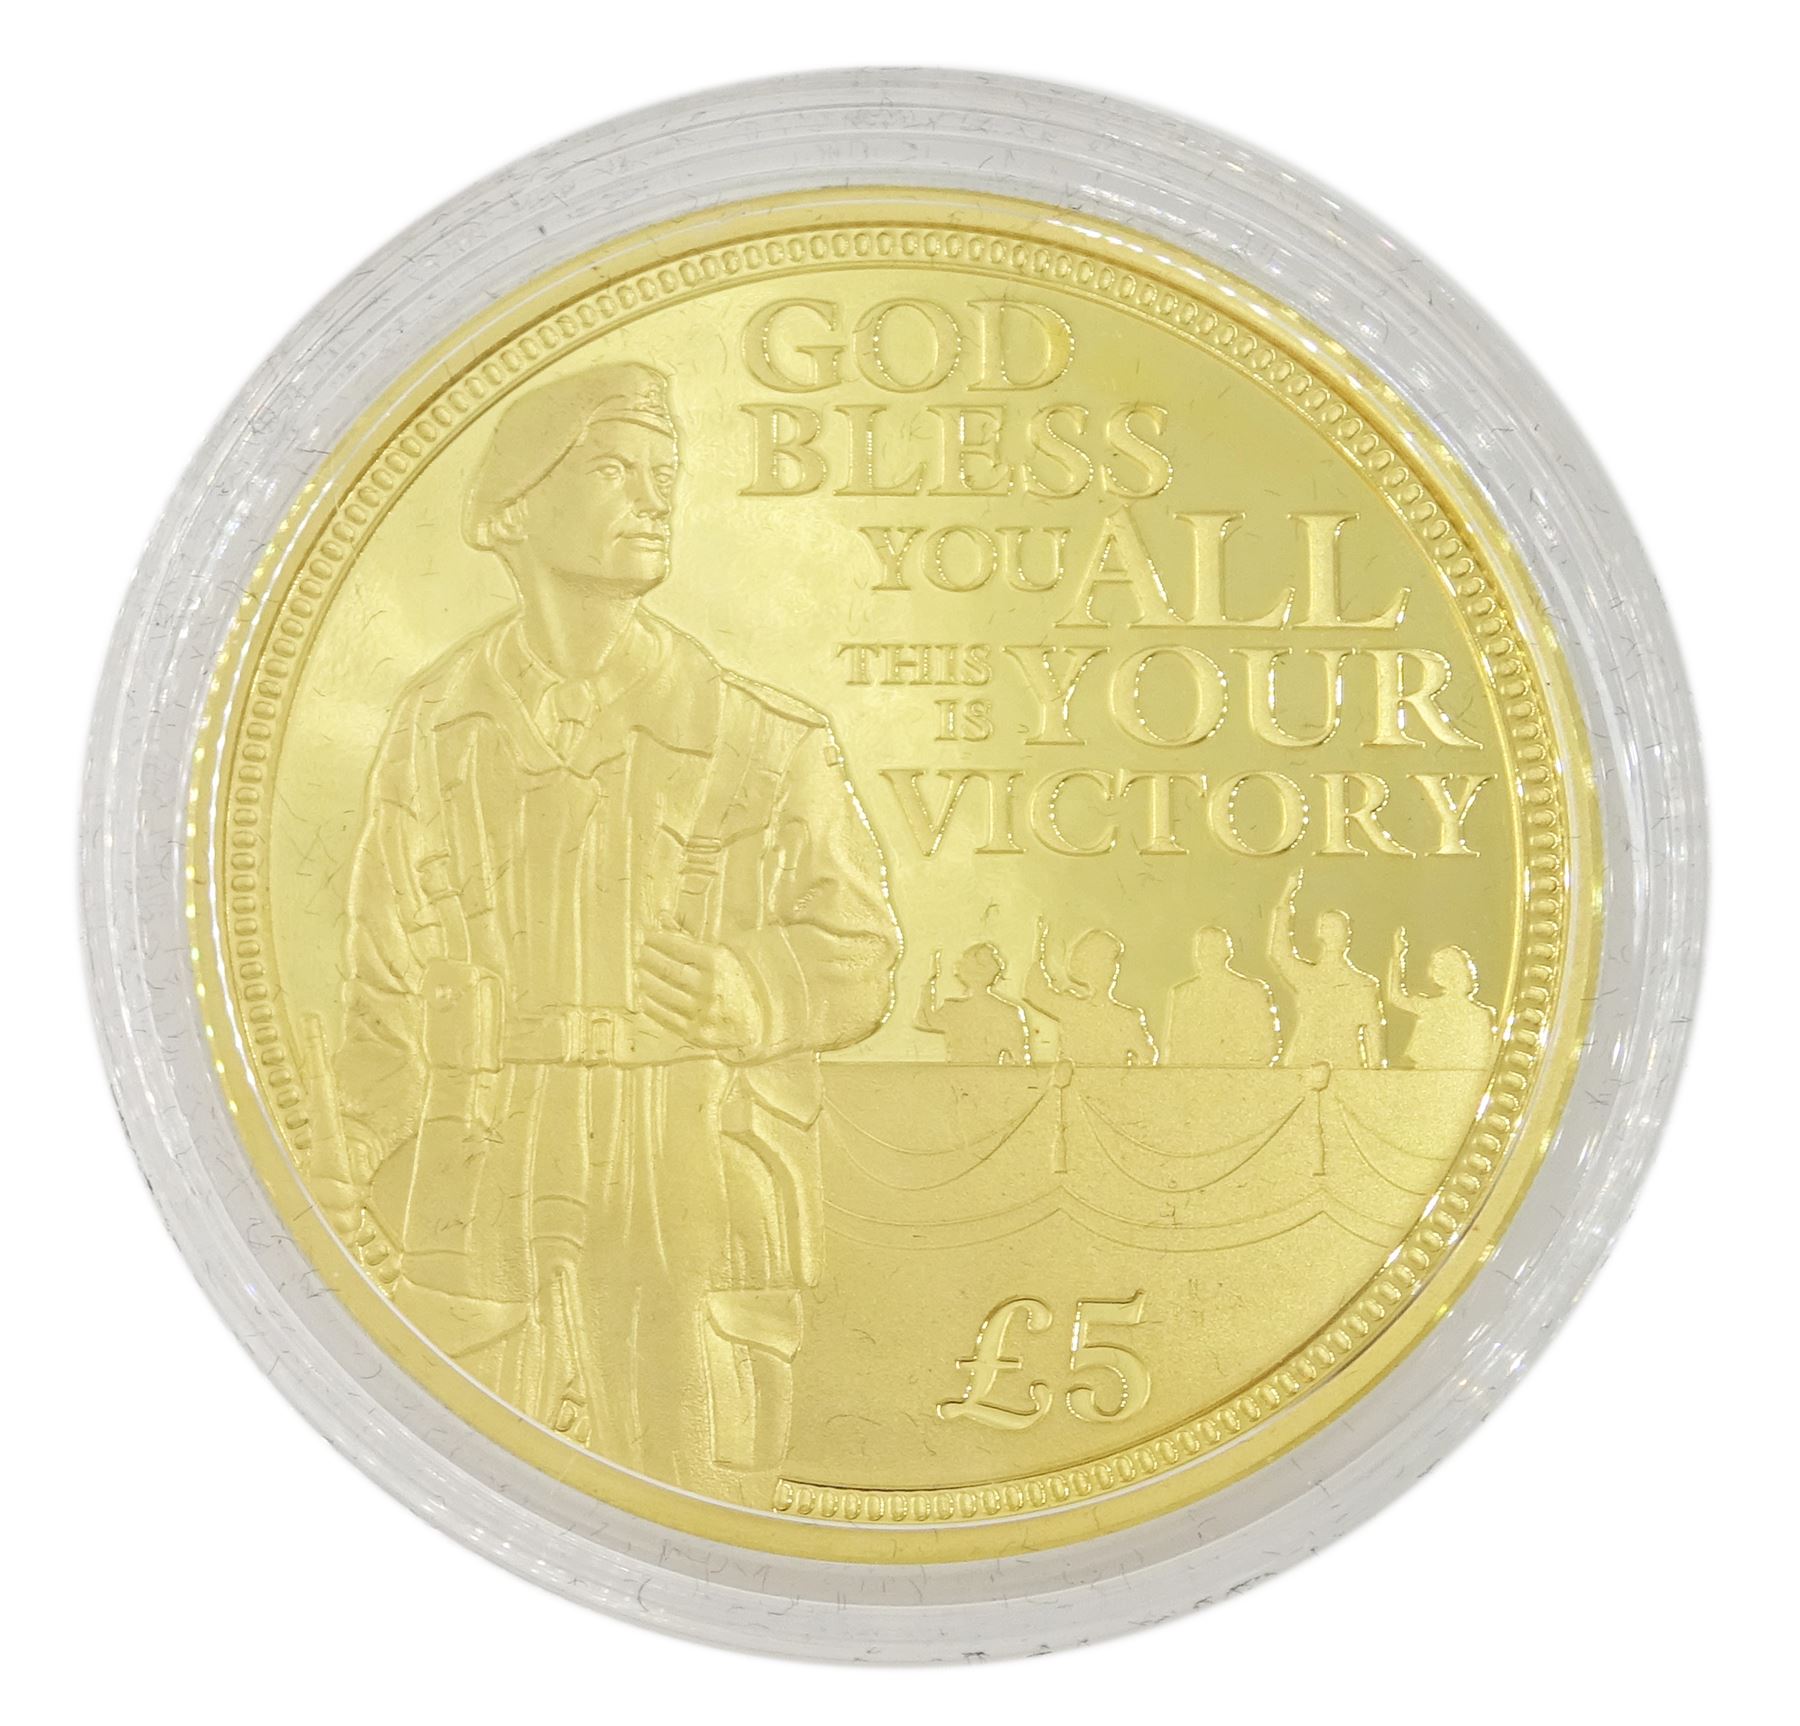 Queen Elizabeth II Guernsey 2020 '75th Anniversary VE Day Victory in Europe' 22ct gold proof five po - Image 3 of 4